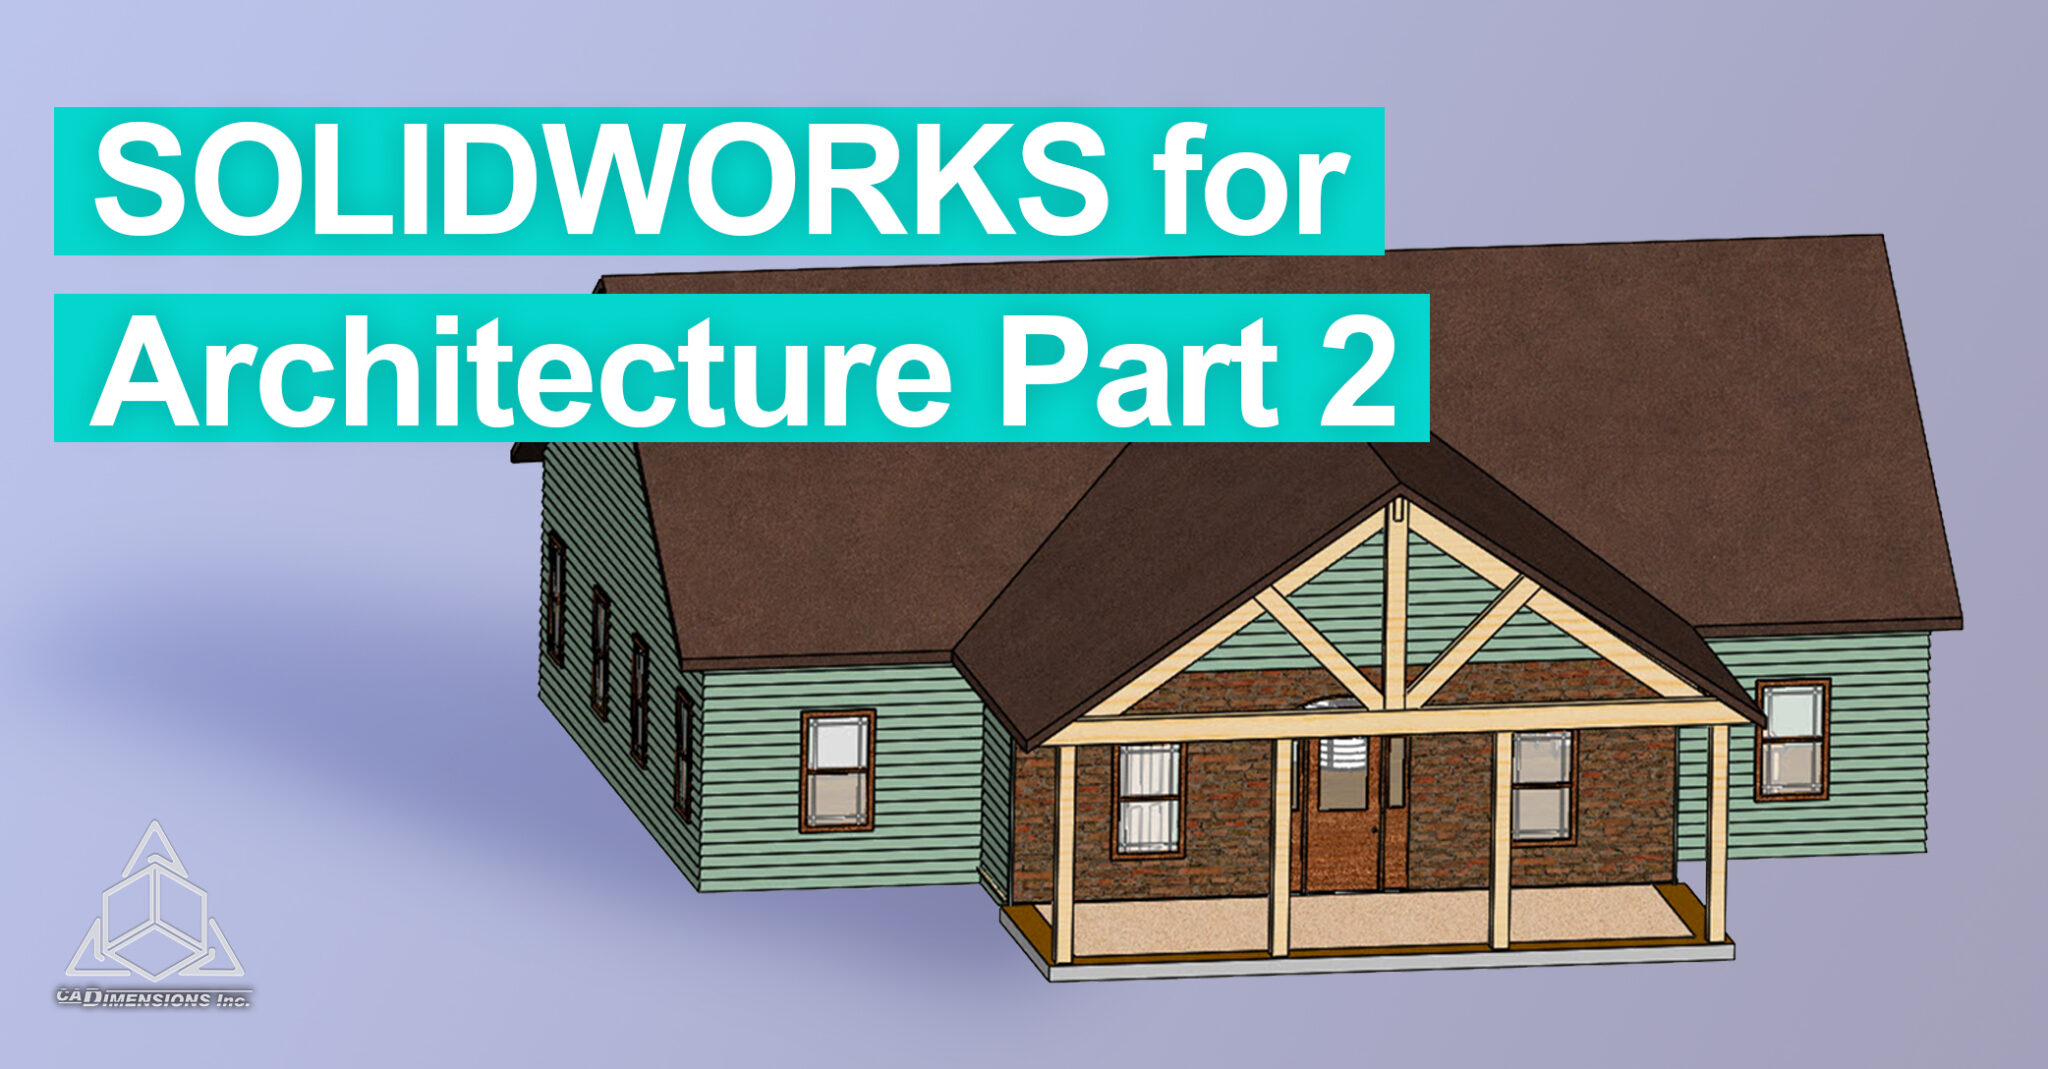 SOLIDWORKS for Architecture Part 2 CADimensions